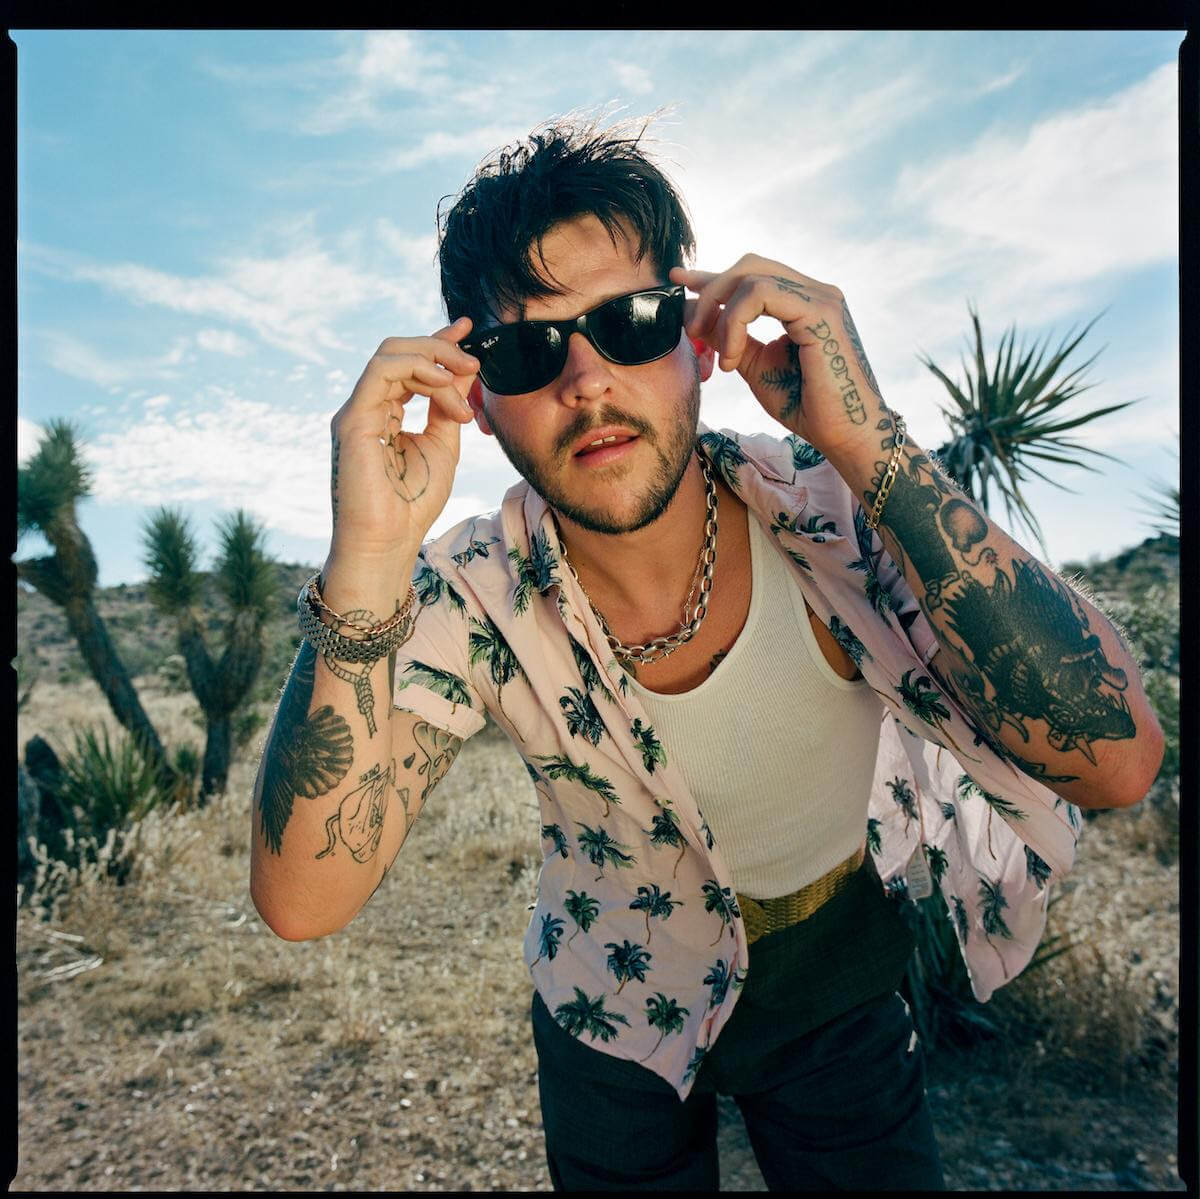 Wavves announces their new album Hideaway, out July 16th via Fat Possum Records, the album, produced by Dave Sitek of TV on the Radio